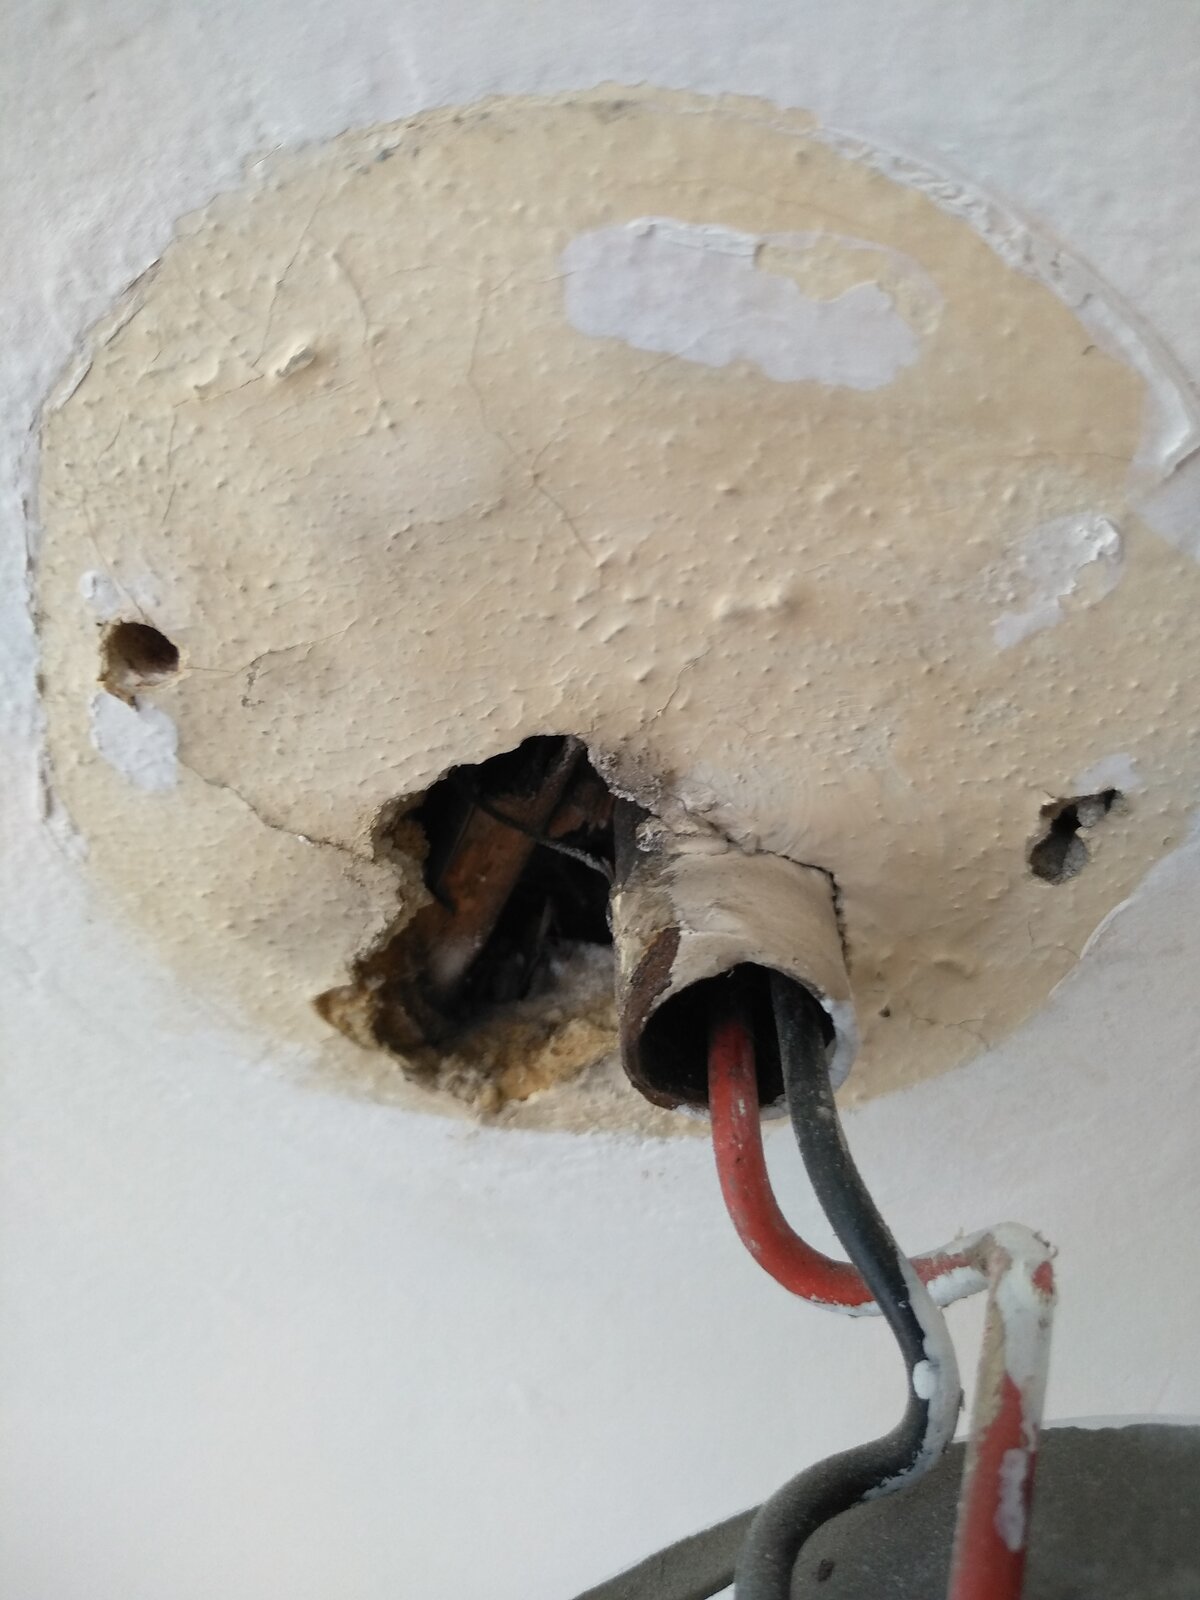 straw and plaster ceiling cut | DIYnot Forums